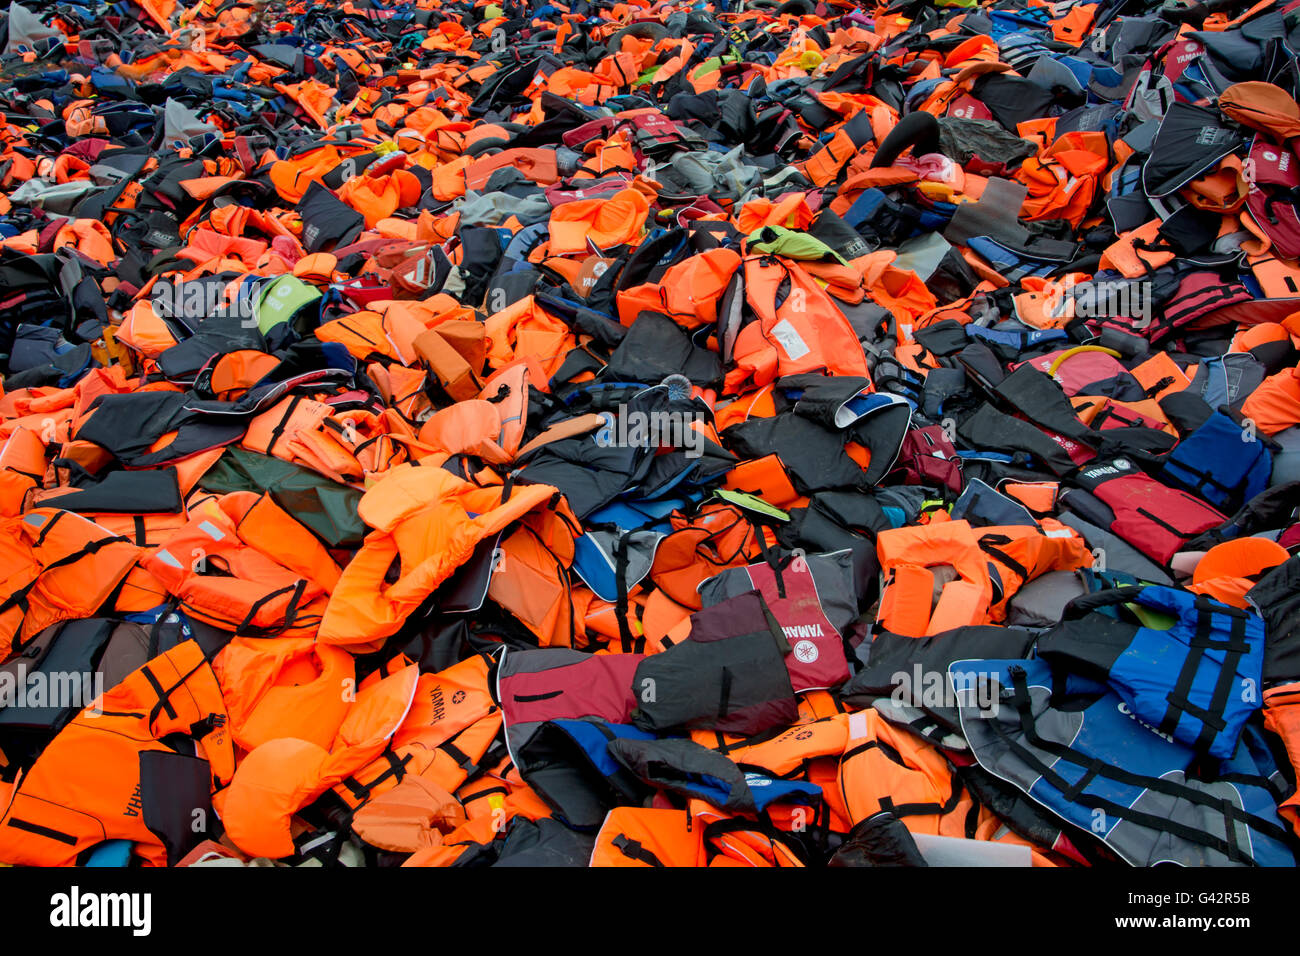 LESVOS, GREECE February 21, 2016: Lifejackets, rubber rings an pieces of the rubber dinghies left by refugees are making a mount Stock Photo